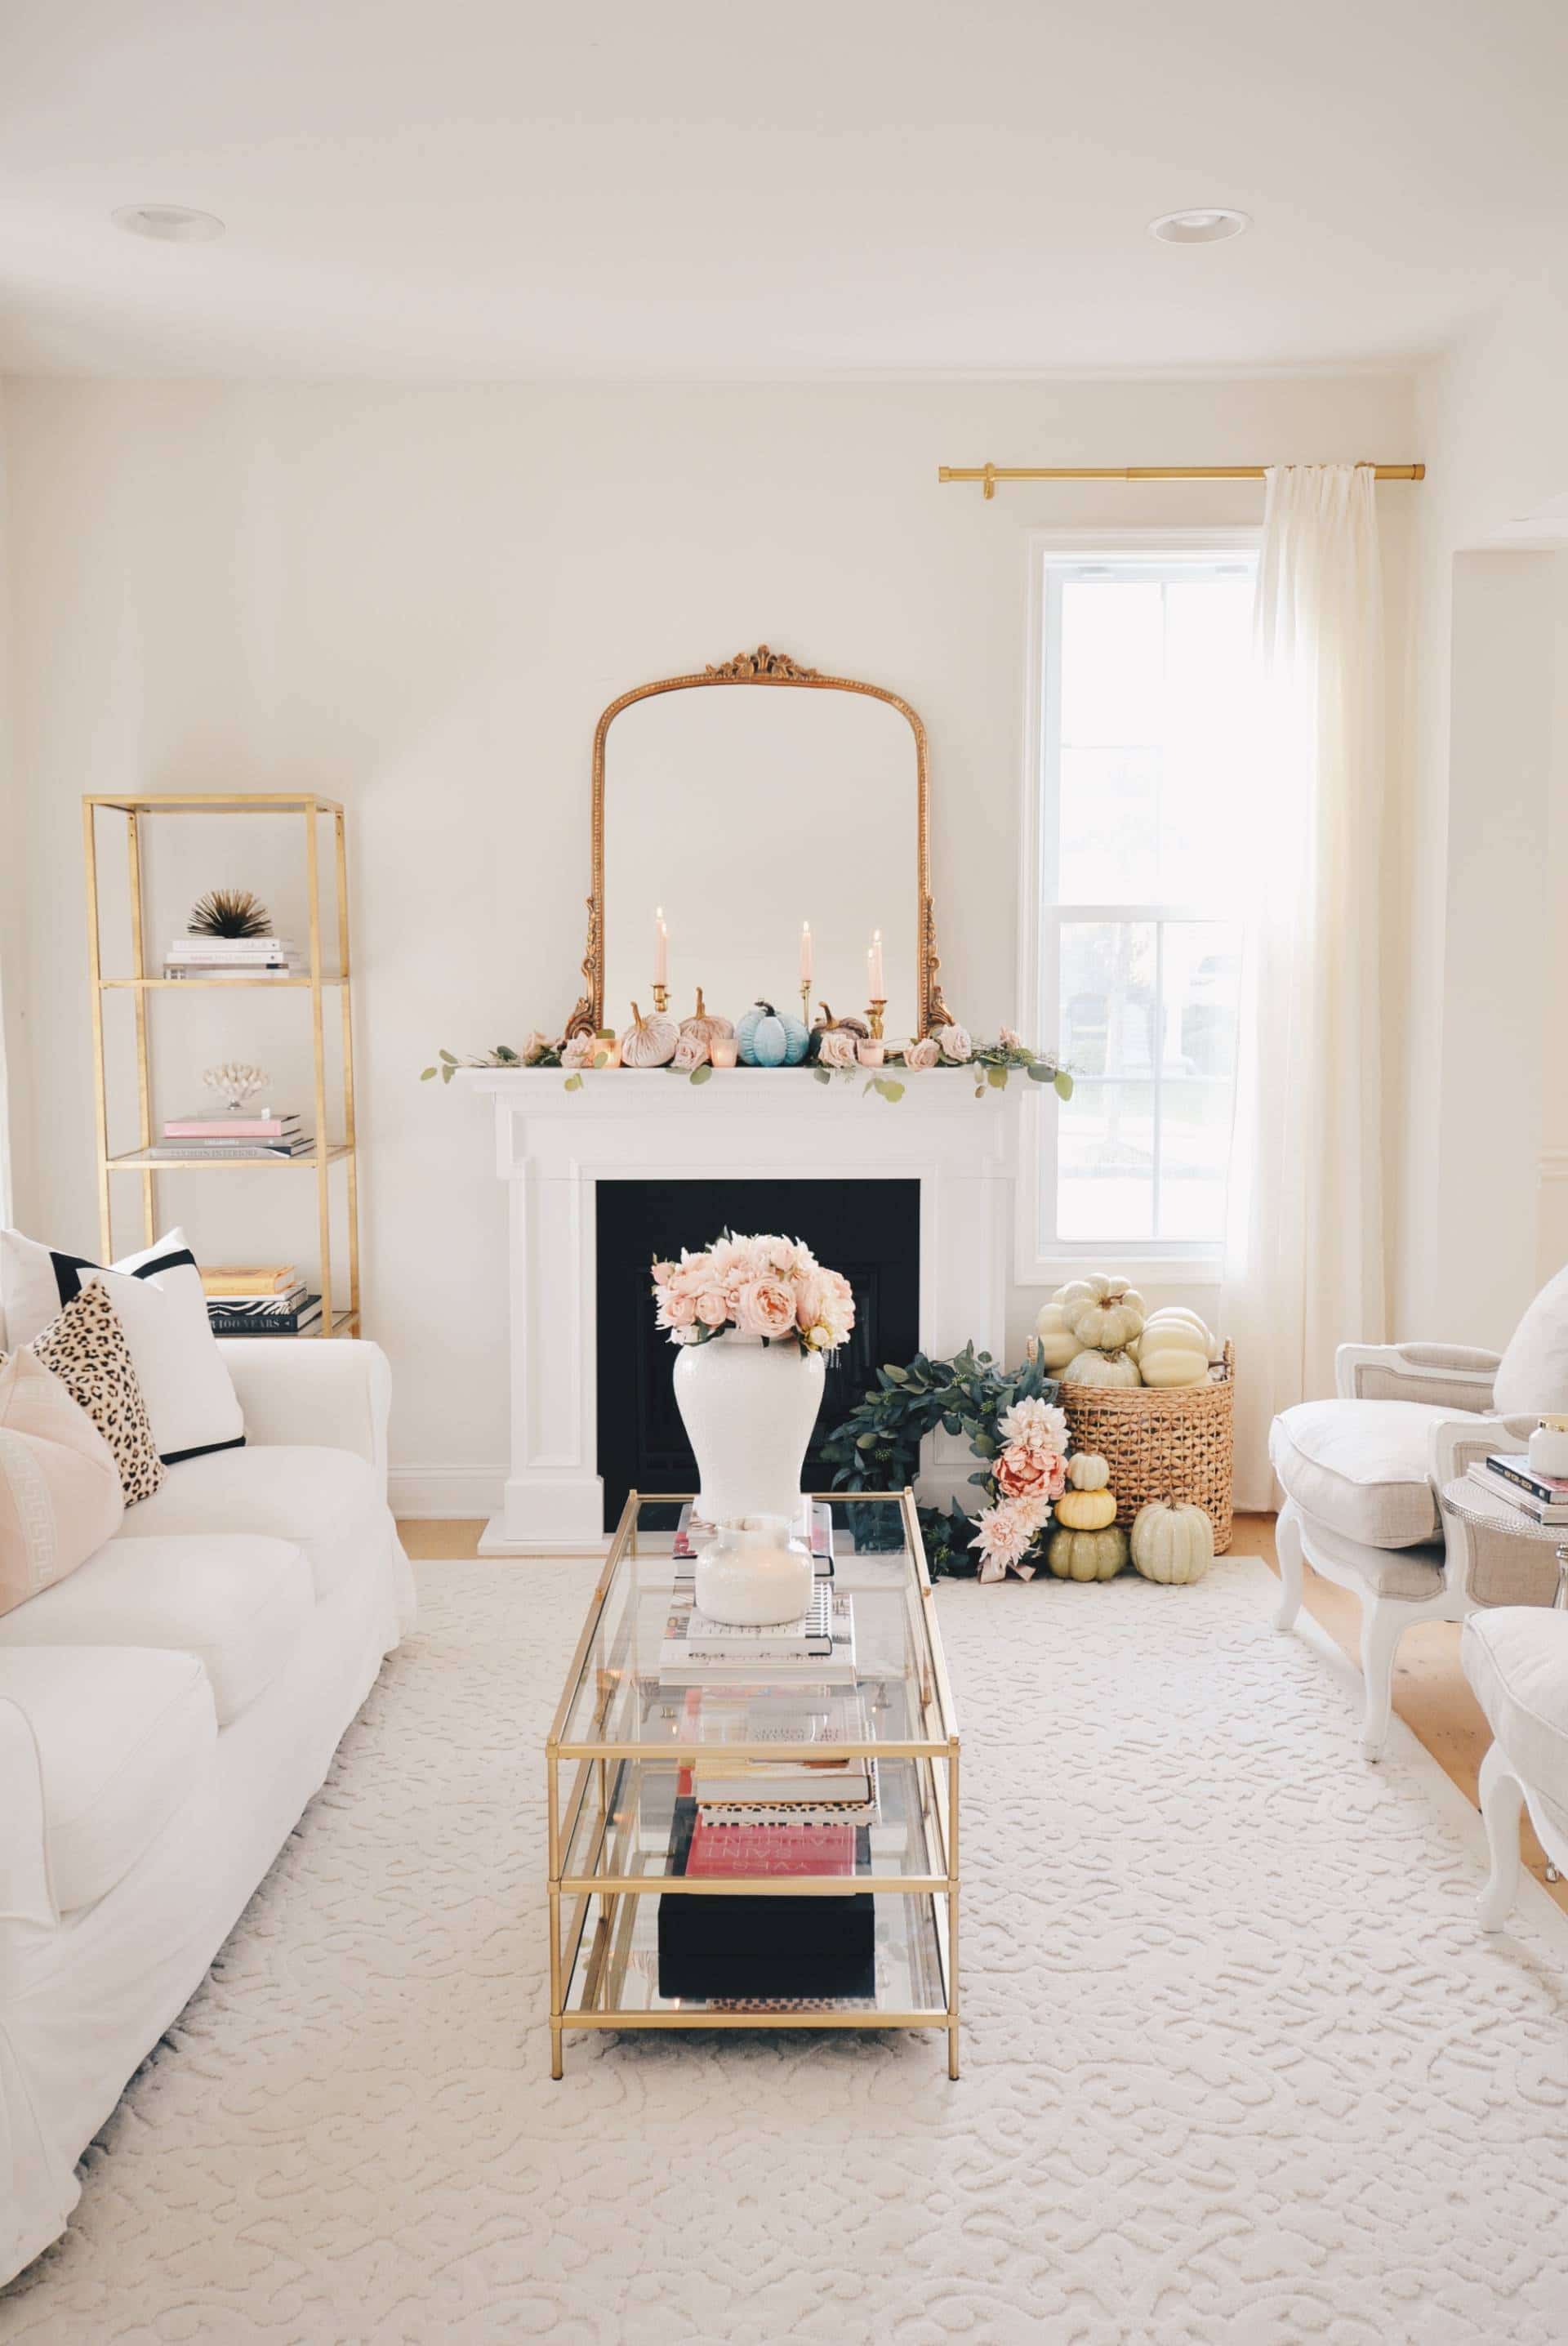 Pink and blush fall decor on mantel in living room